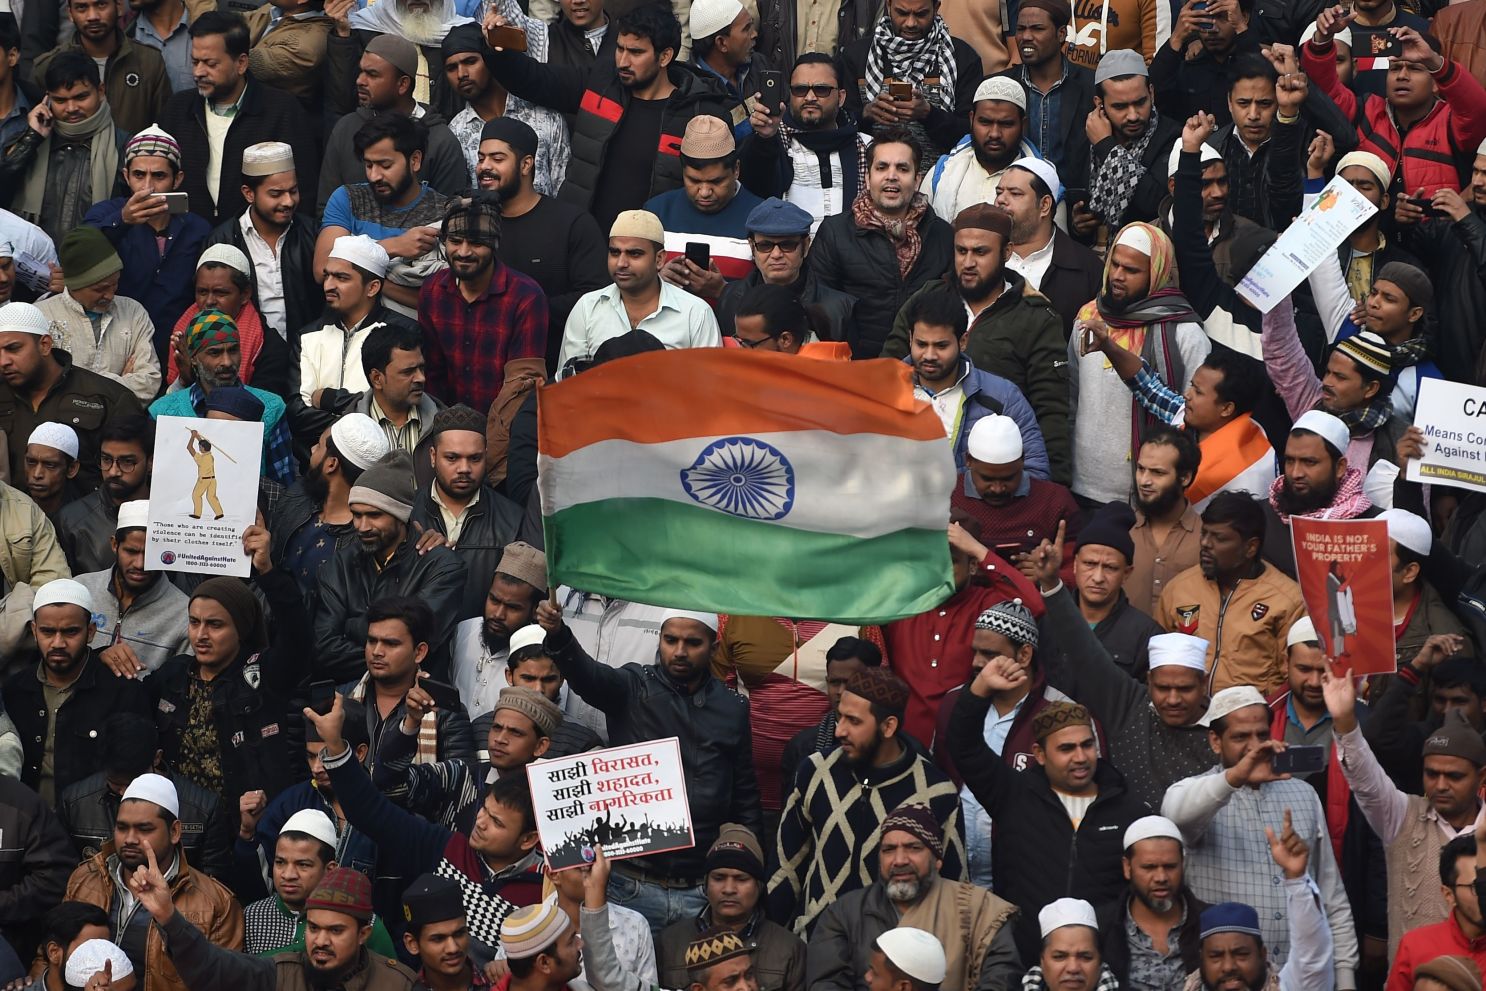 Large gatherings banned amid protests against Indian citizenship law